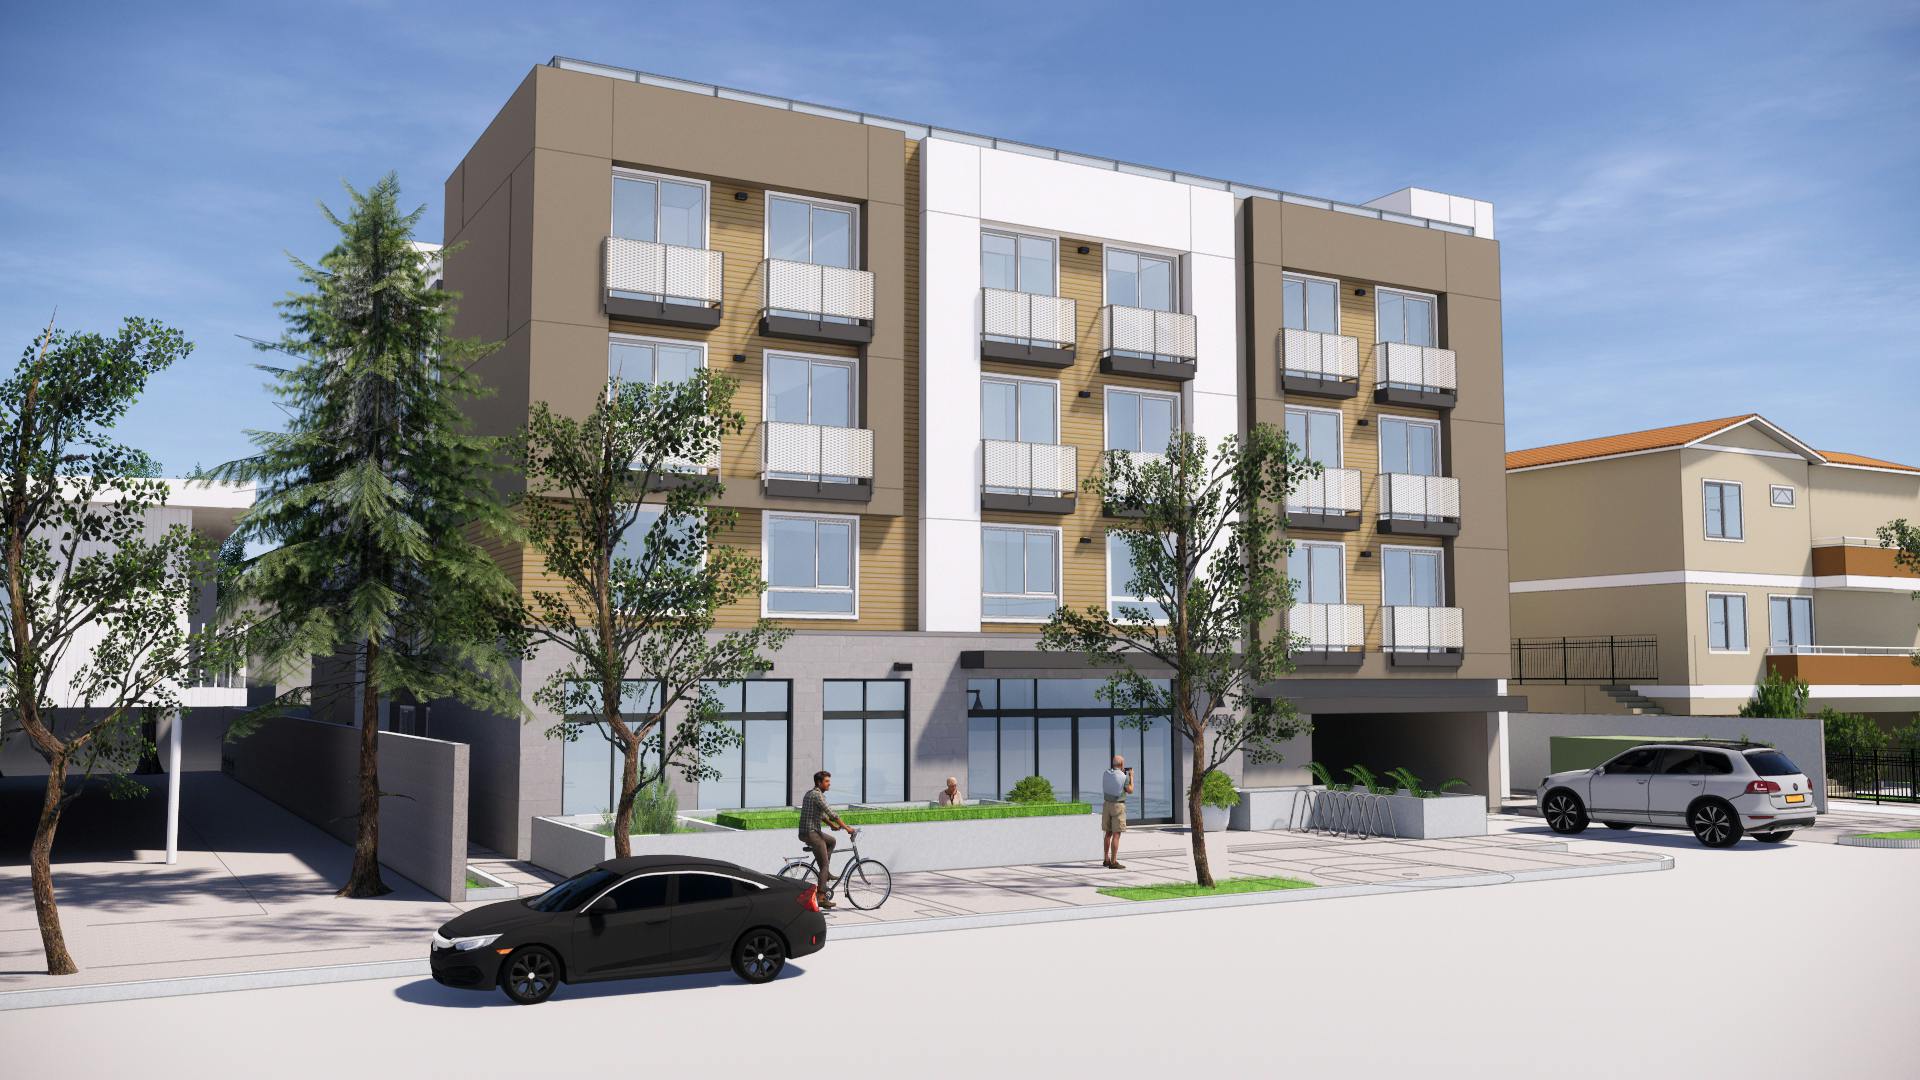 rendering of project site showing 4 story apartment building